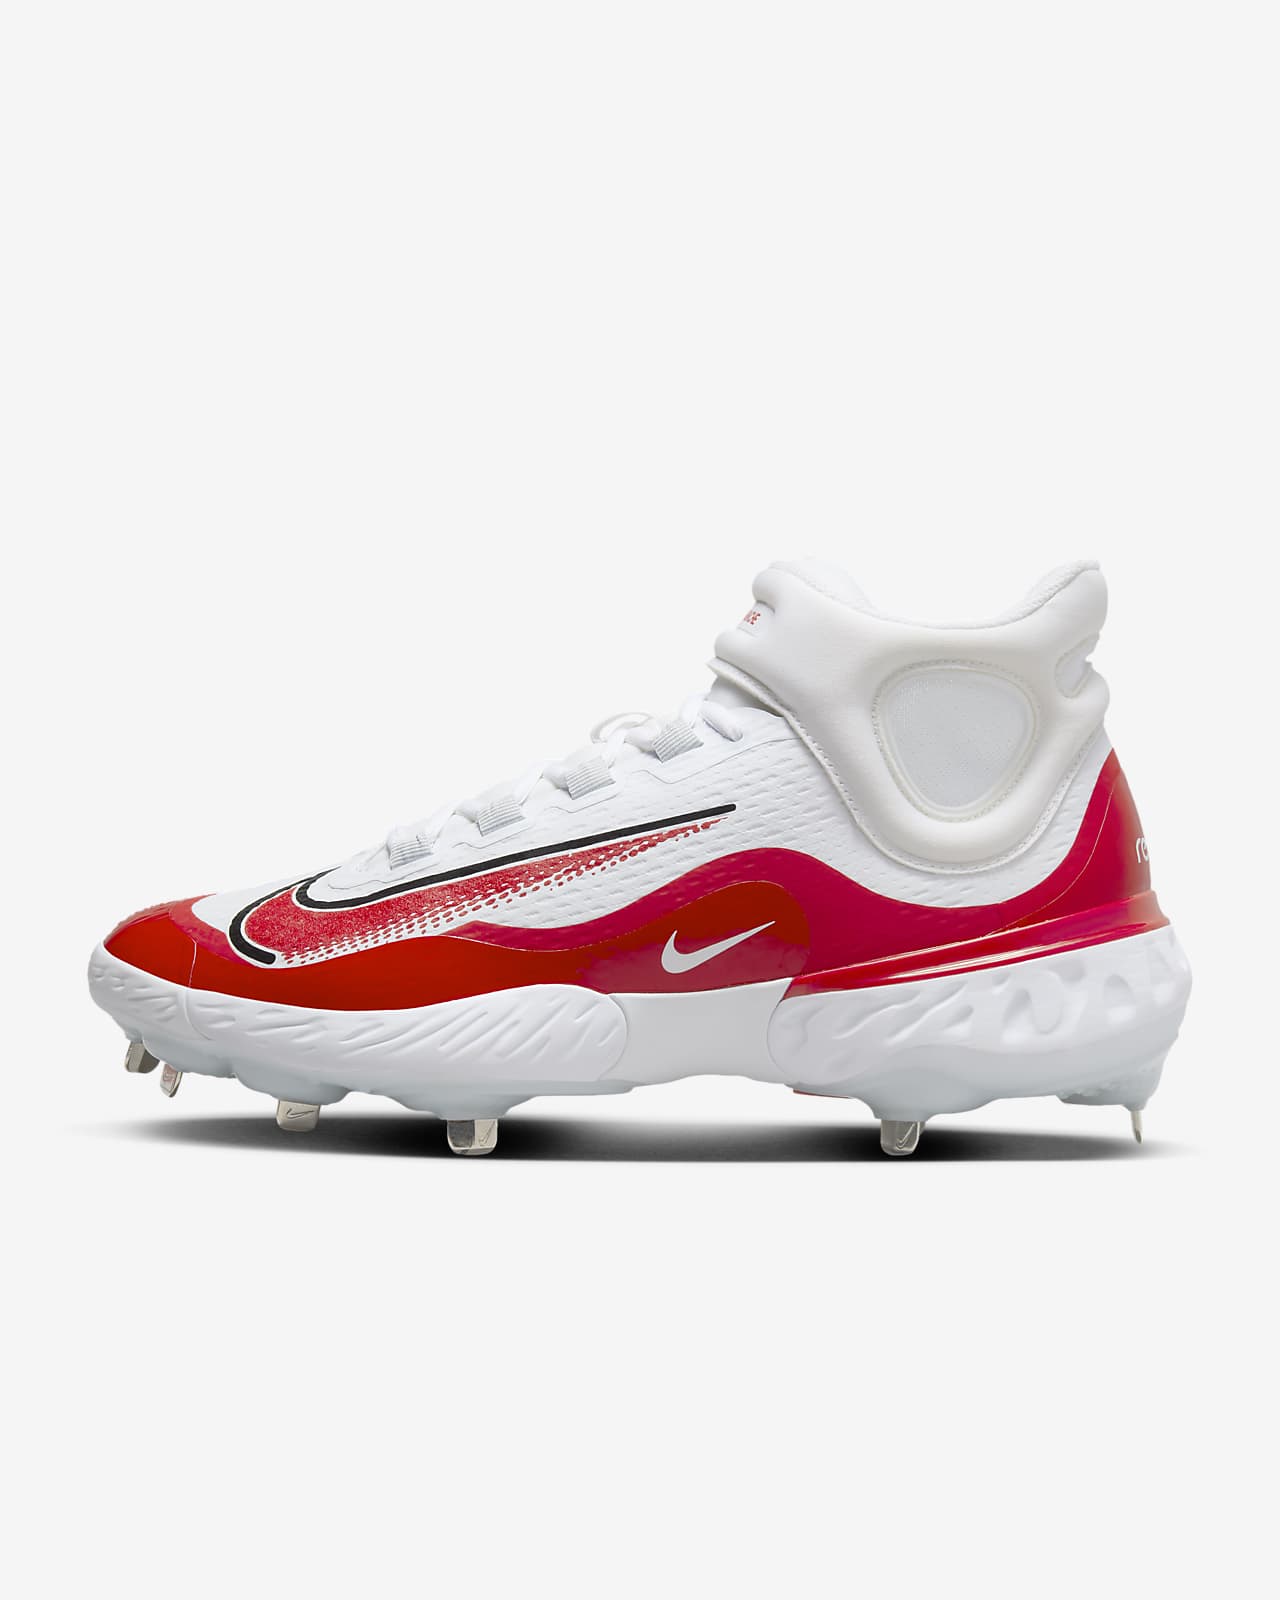 Introduction to Nike Baseball Cleats